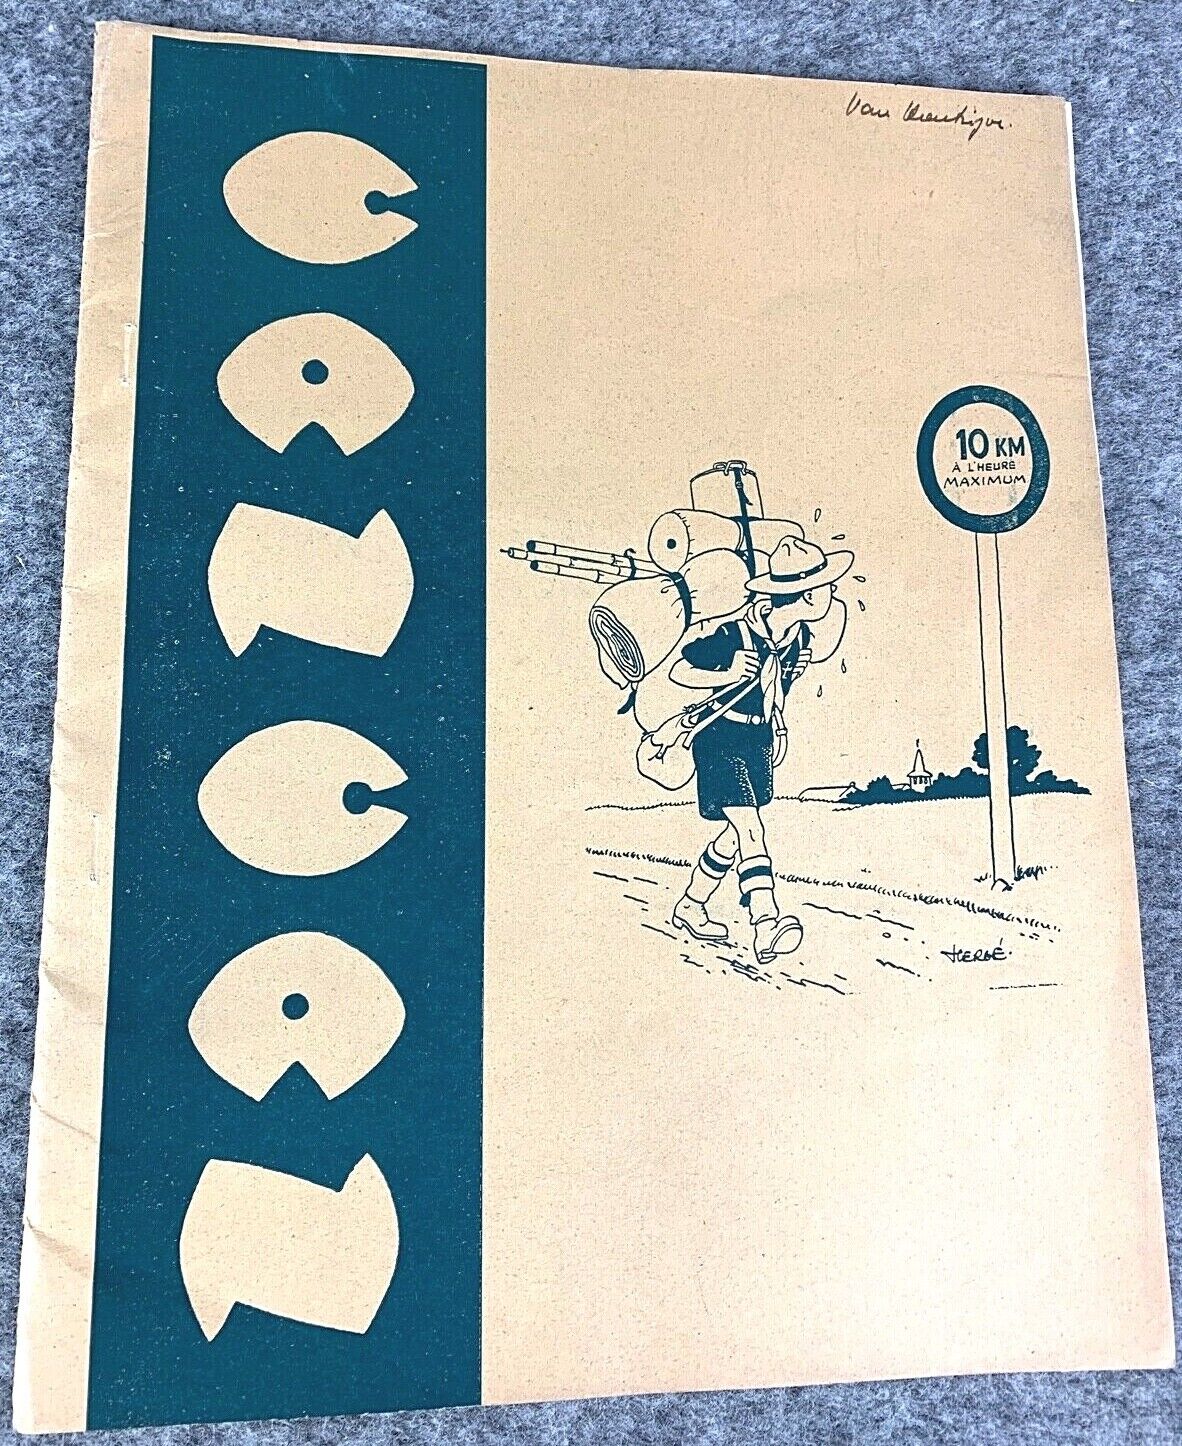 Vintage 1935 "CANCAN" Scout issue illustrated by Herge with notes EO Tintin